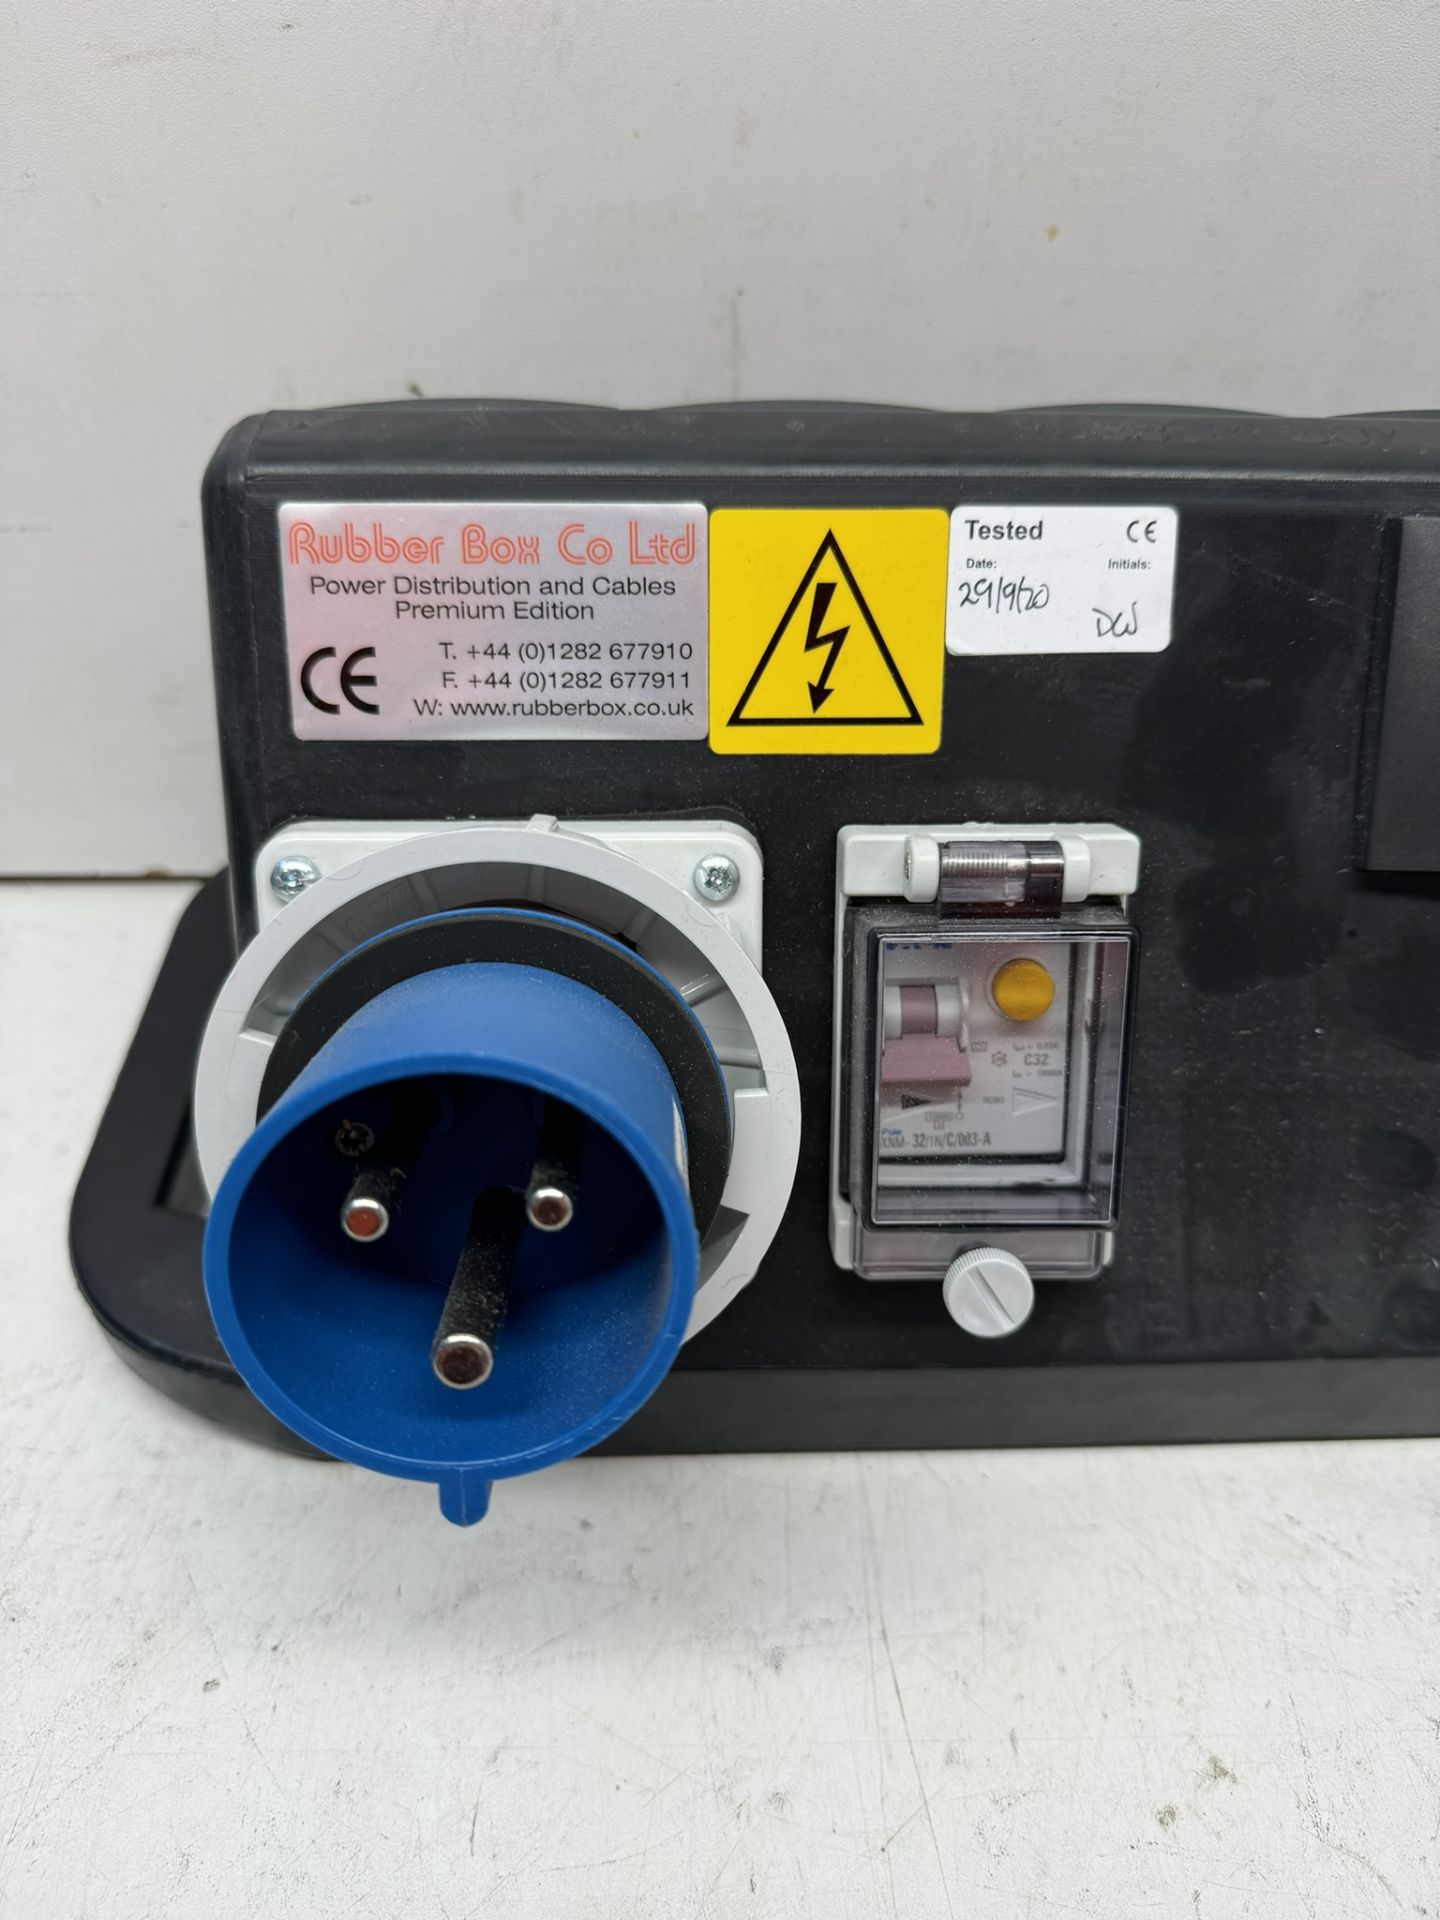 Rubber Box Triangle power distribution Box f/w: 16A 240v In & Out to 14 x 13A 240v Sockets - Bild 3 aus 4